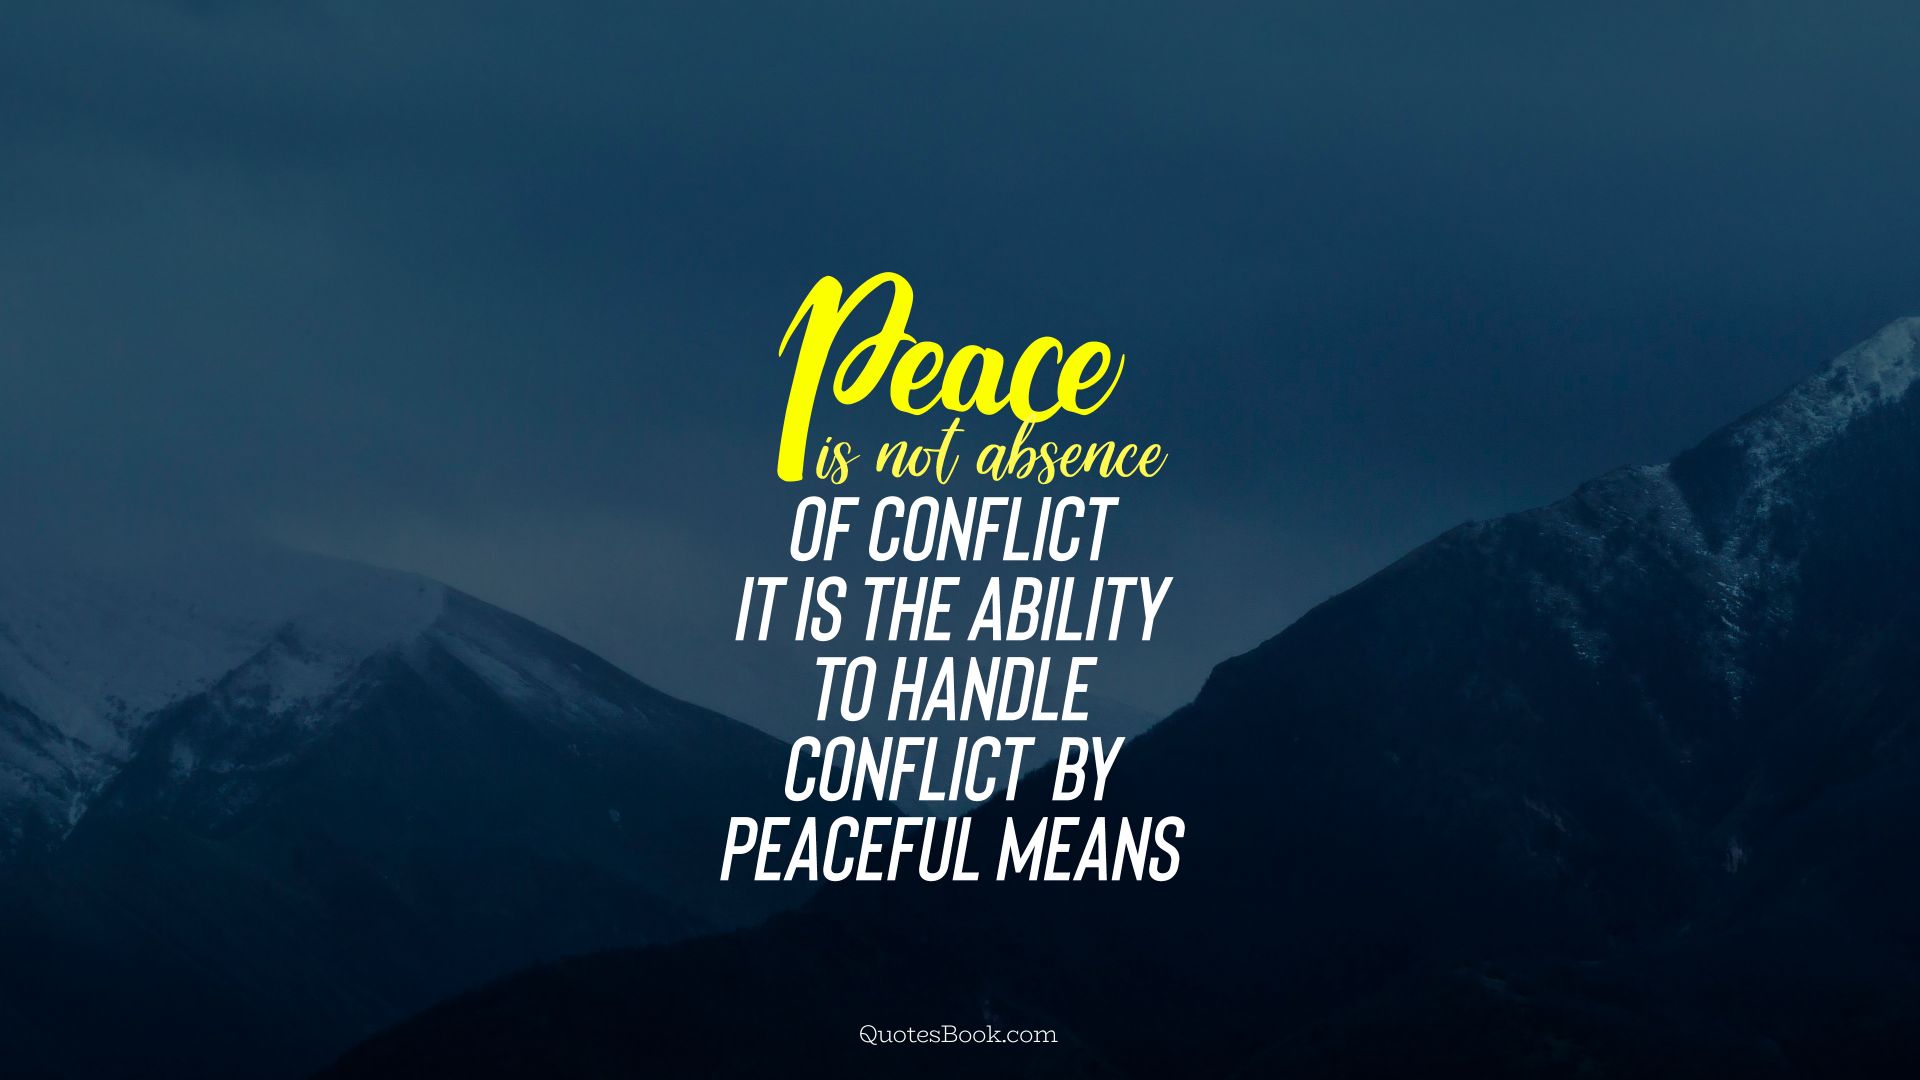 Peace is not absence of conflict it is the ability to handle conflict by peaceful means